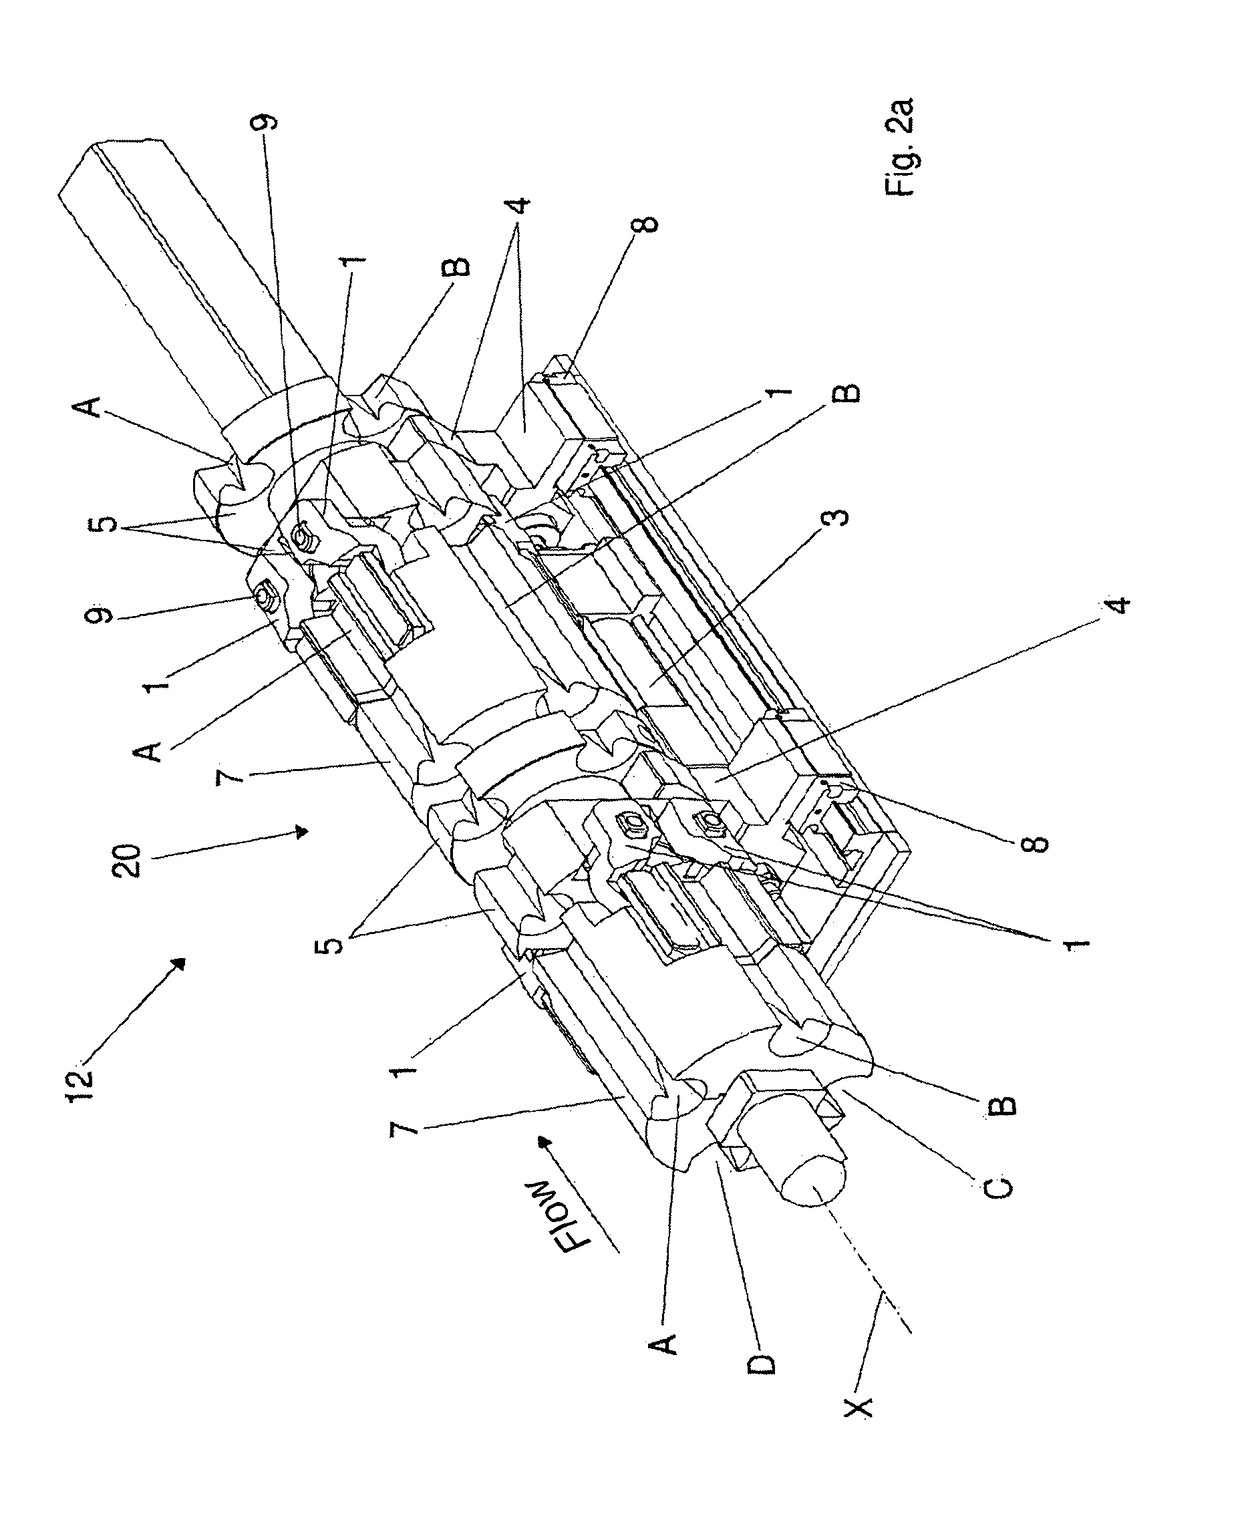 Bar unloading apparatus of the revolver type provided with braking device